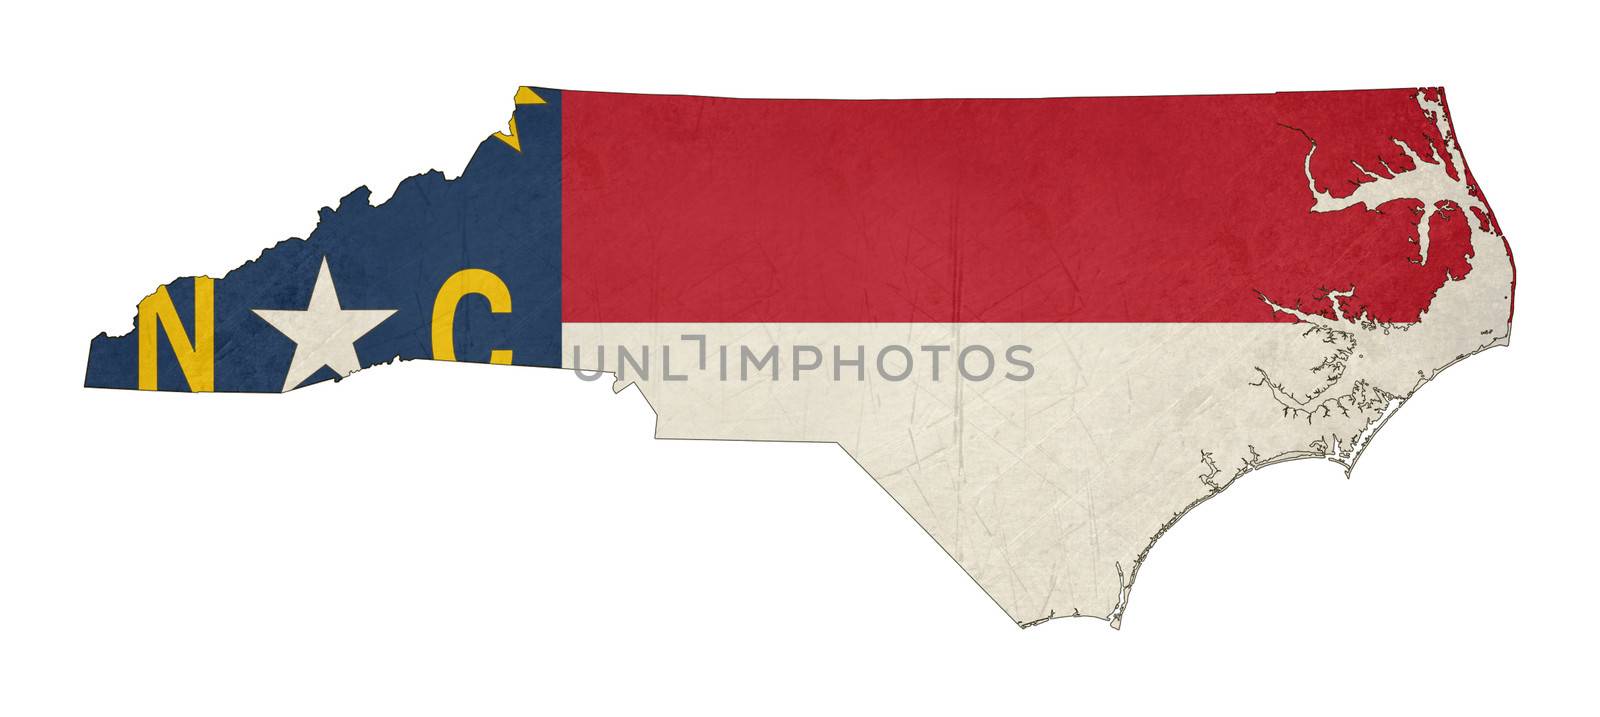 Grunge state of North Carolina flag map isolated on a white background, U.S.A.